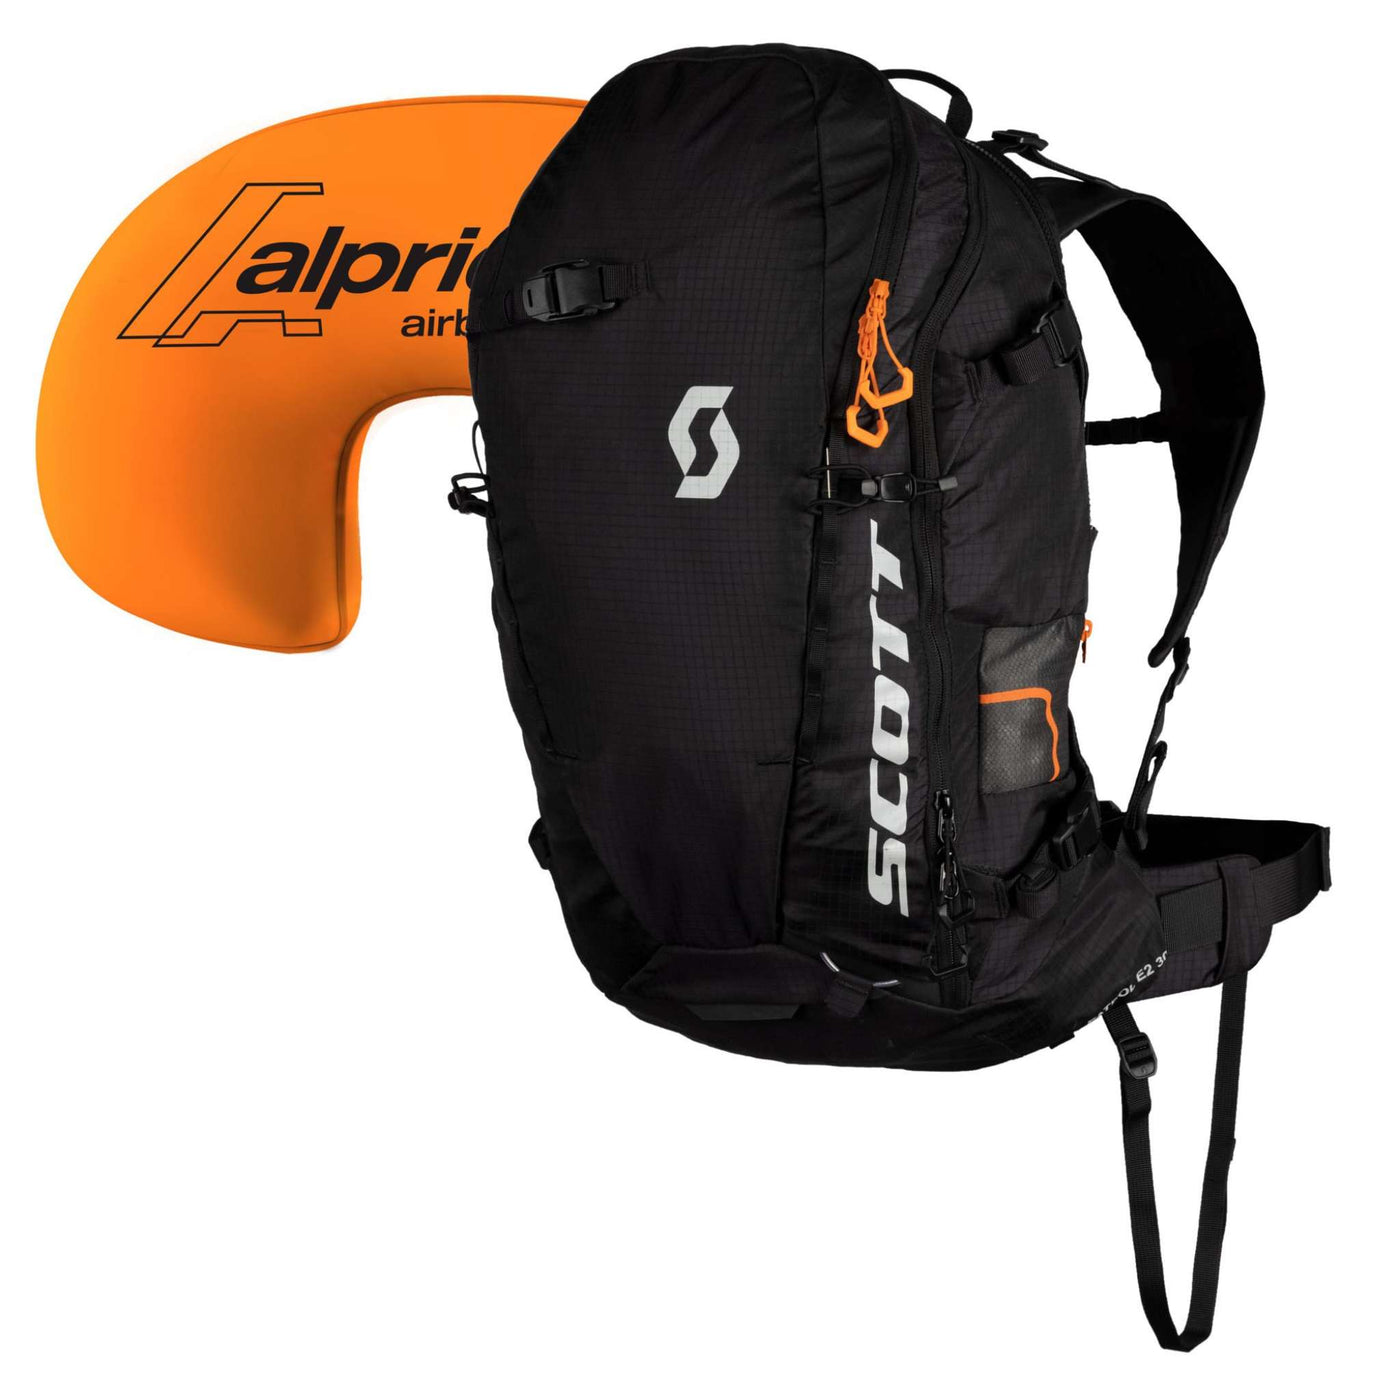 Scott Pack Patrol E2 30 Avalanche Pack | Airbag Pack NZ | Backcountry Ski Avalanche Airbag Backpack | Further Faster Christchurch NZ #black